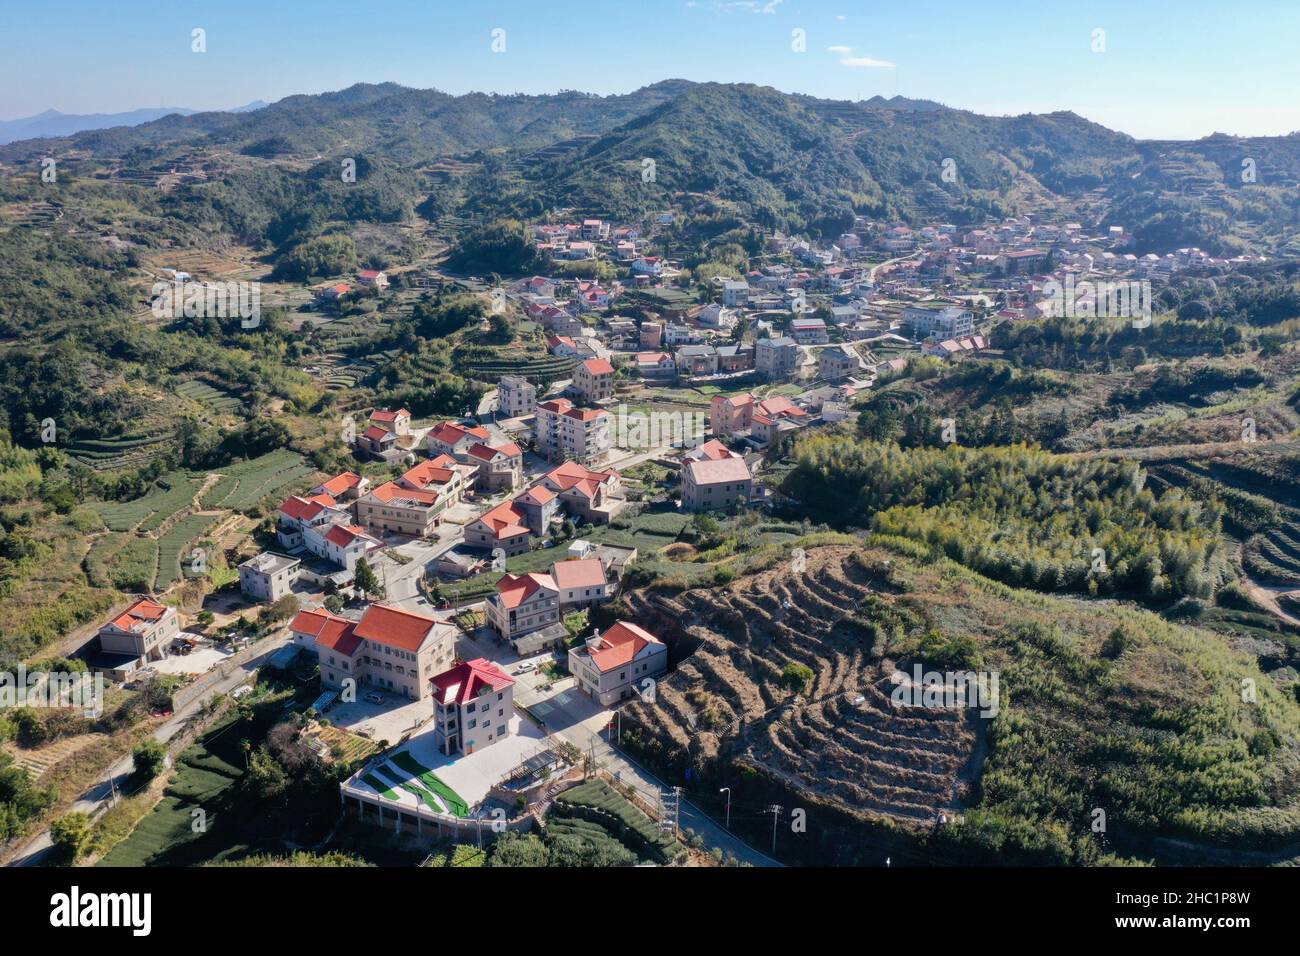 (211221) -- XIAMEN, Dec. 21, 2021 (Xinhua) -- Aerial photo taken on Dec. 7, 2021 shows the scenery of Junying Village of Tongan District in Xiamen, southeast China's Fujian Province. This year marks the 40th anniversary of the establishment of the Xiamen Special Economic Zone (SEZ). The Xiamen SEZ has made important contributions to the country's reform, opening up, and socialist modernization, and played a unique role in promoting national reunification. (Xinhua/Jiang Kehong) Stock Photo